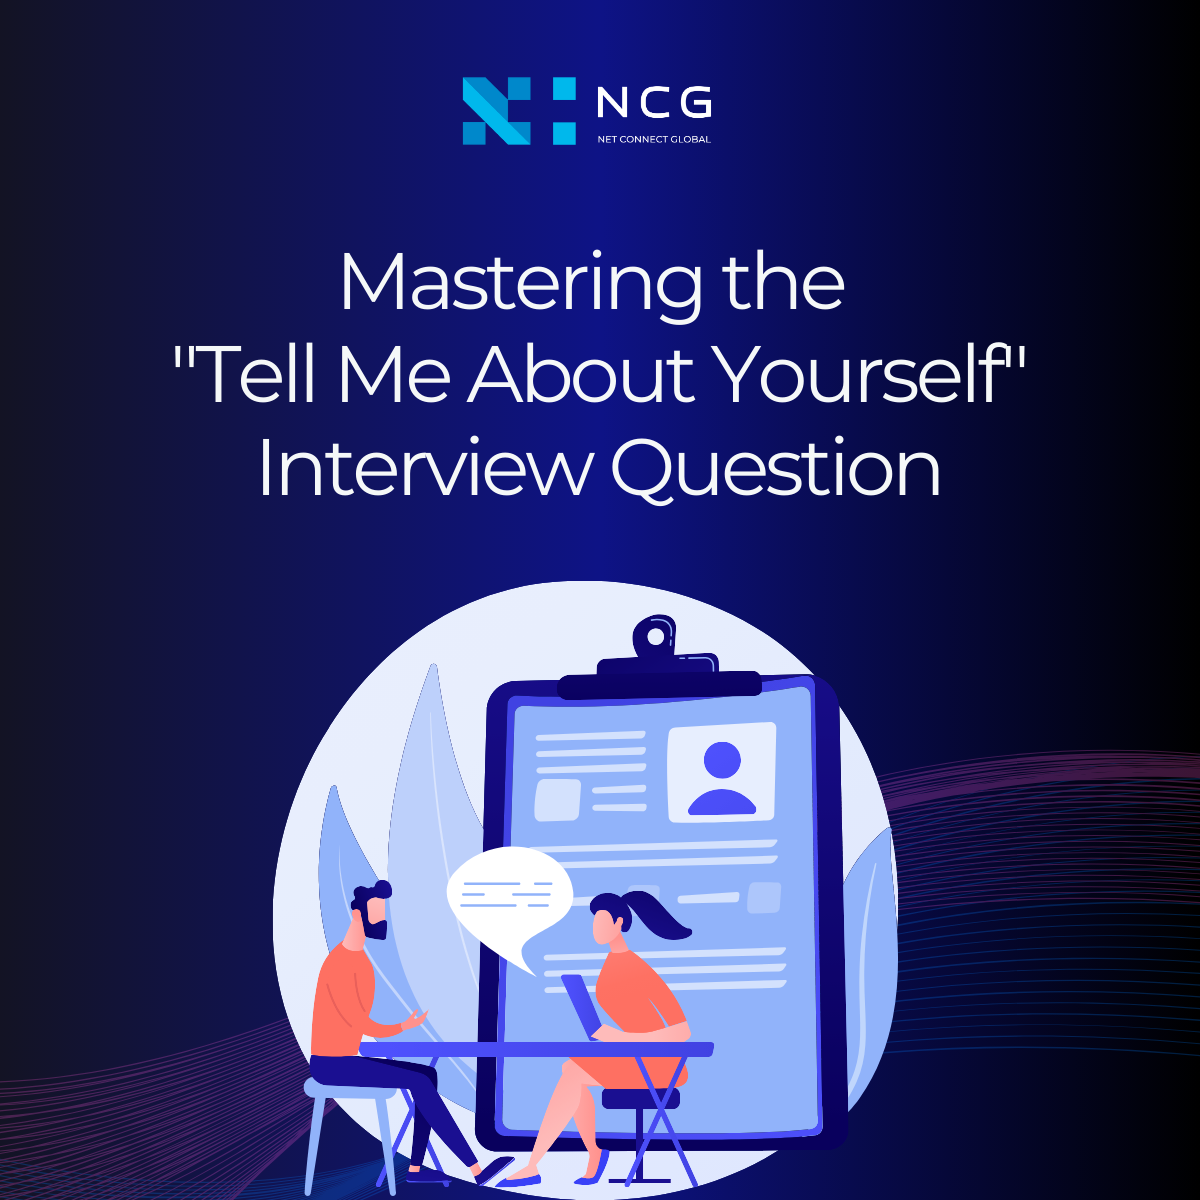 Crafting Your Narrative: Mastering the “Tell Me About Yourself” Interview Question